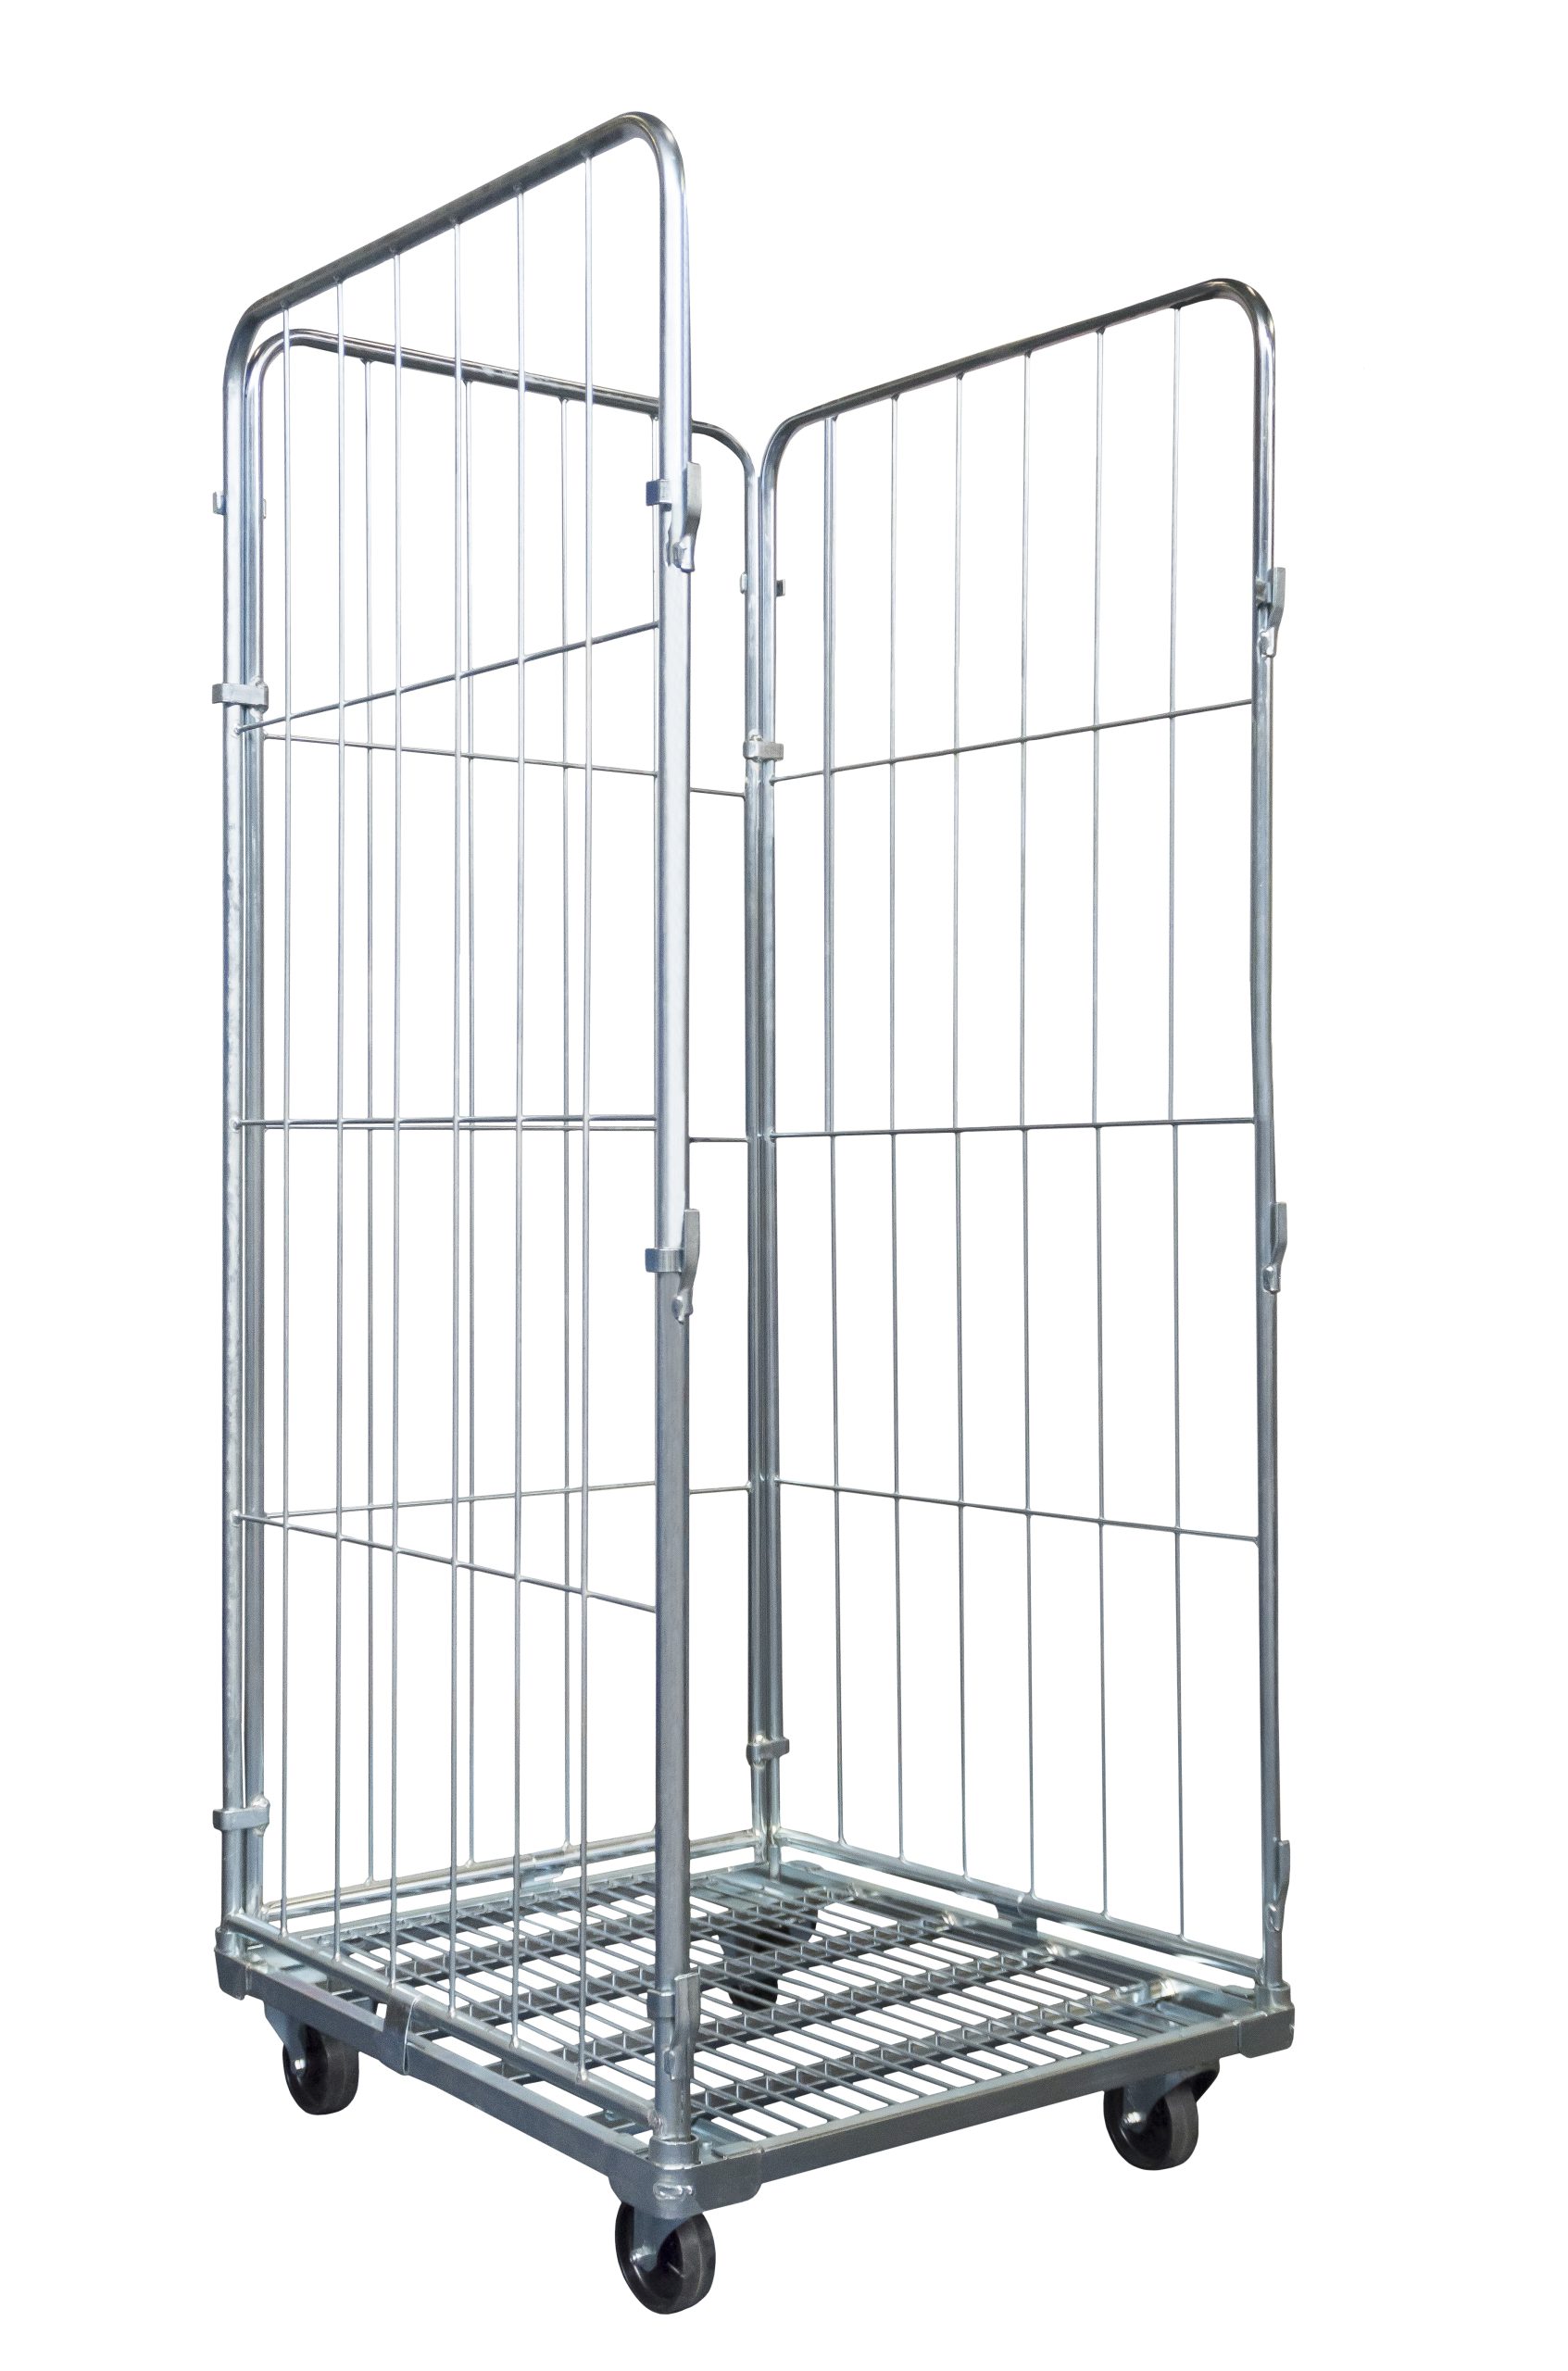 Laundry Roll Cage 400 Capacity Container Front 800x720x1800 Rotomrent Gate, | Hinged rent for Load kg mm